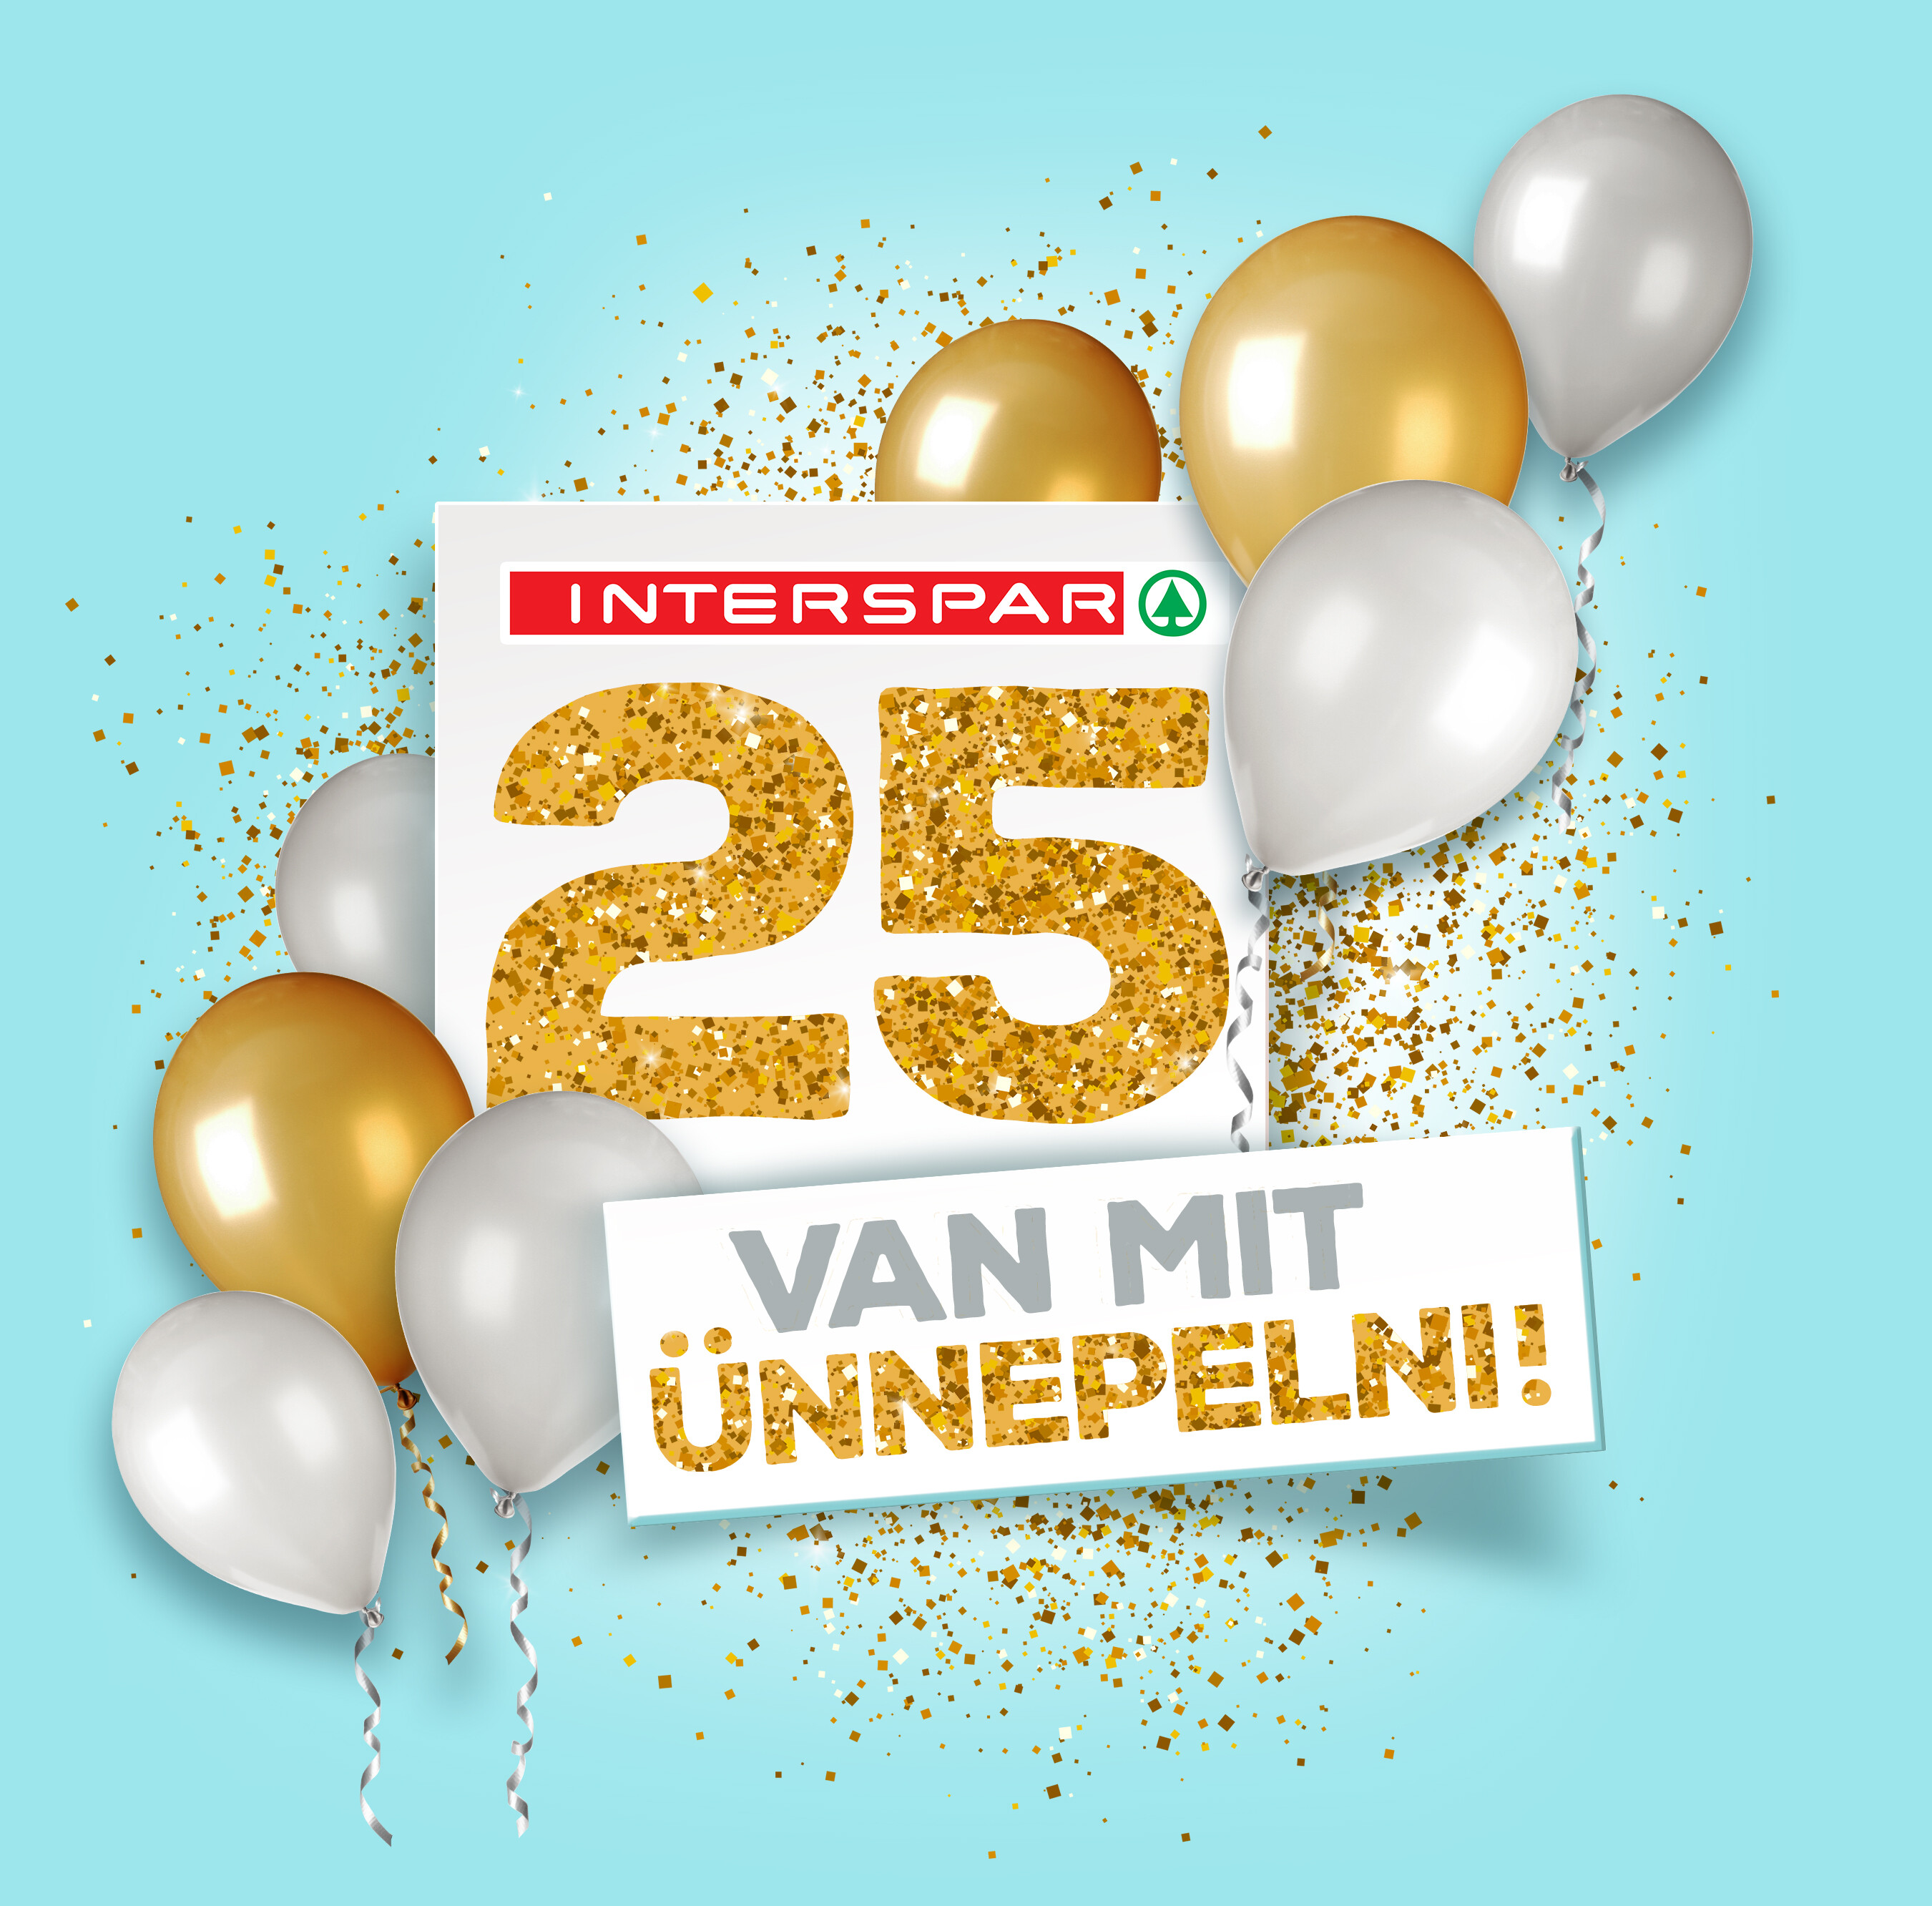 25 years of success story: INTERSPAR is celebrating its anniversary in Hungary